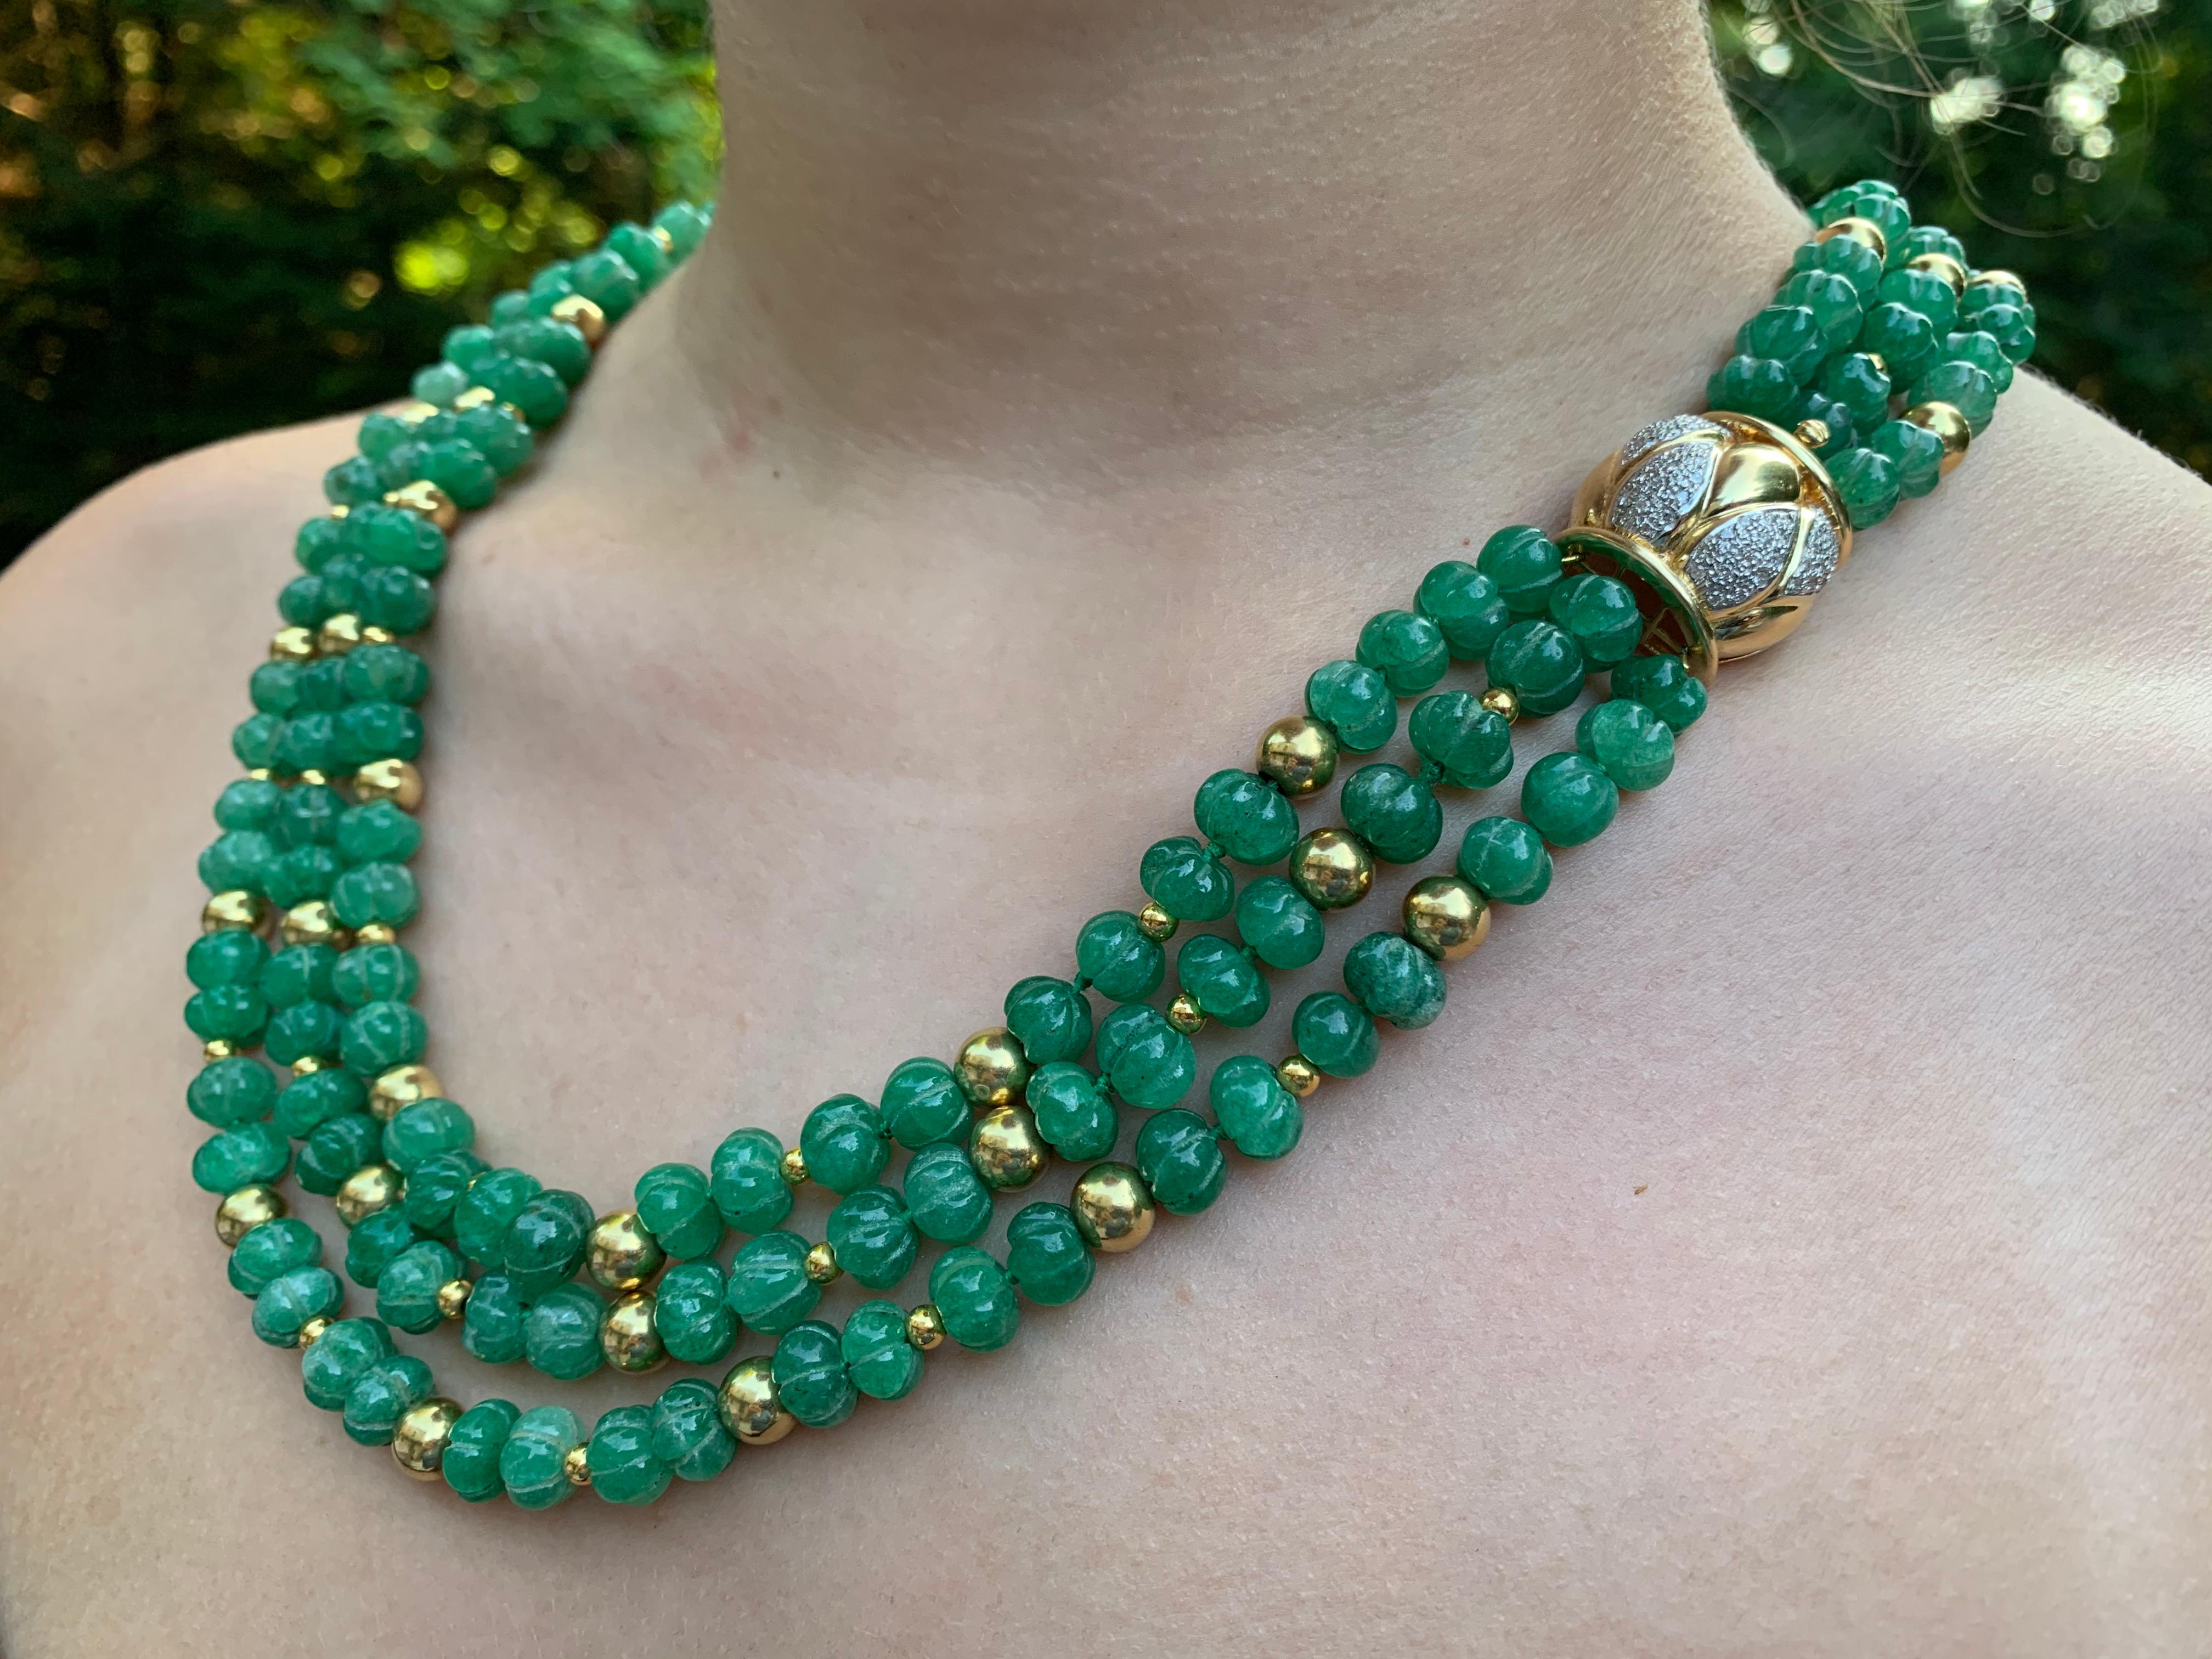 Spectacular designer signed triple strand necklace composed of 195 hand carved melon shaped chrysoprase beads interspersed with 91 18K gold beads, 46 6mm and 45 3mm, with a large, ornate substantial 18k gold and diamond closure which may be worn as